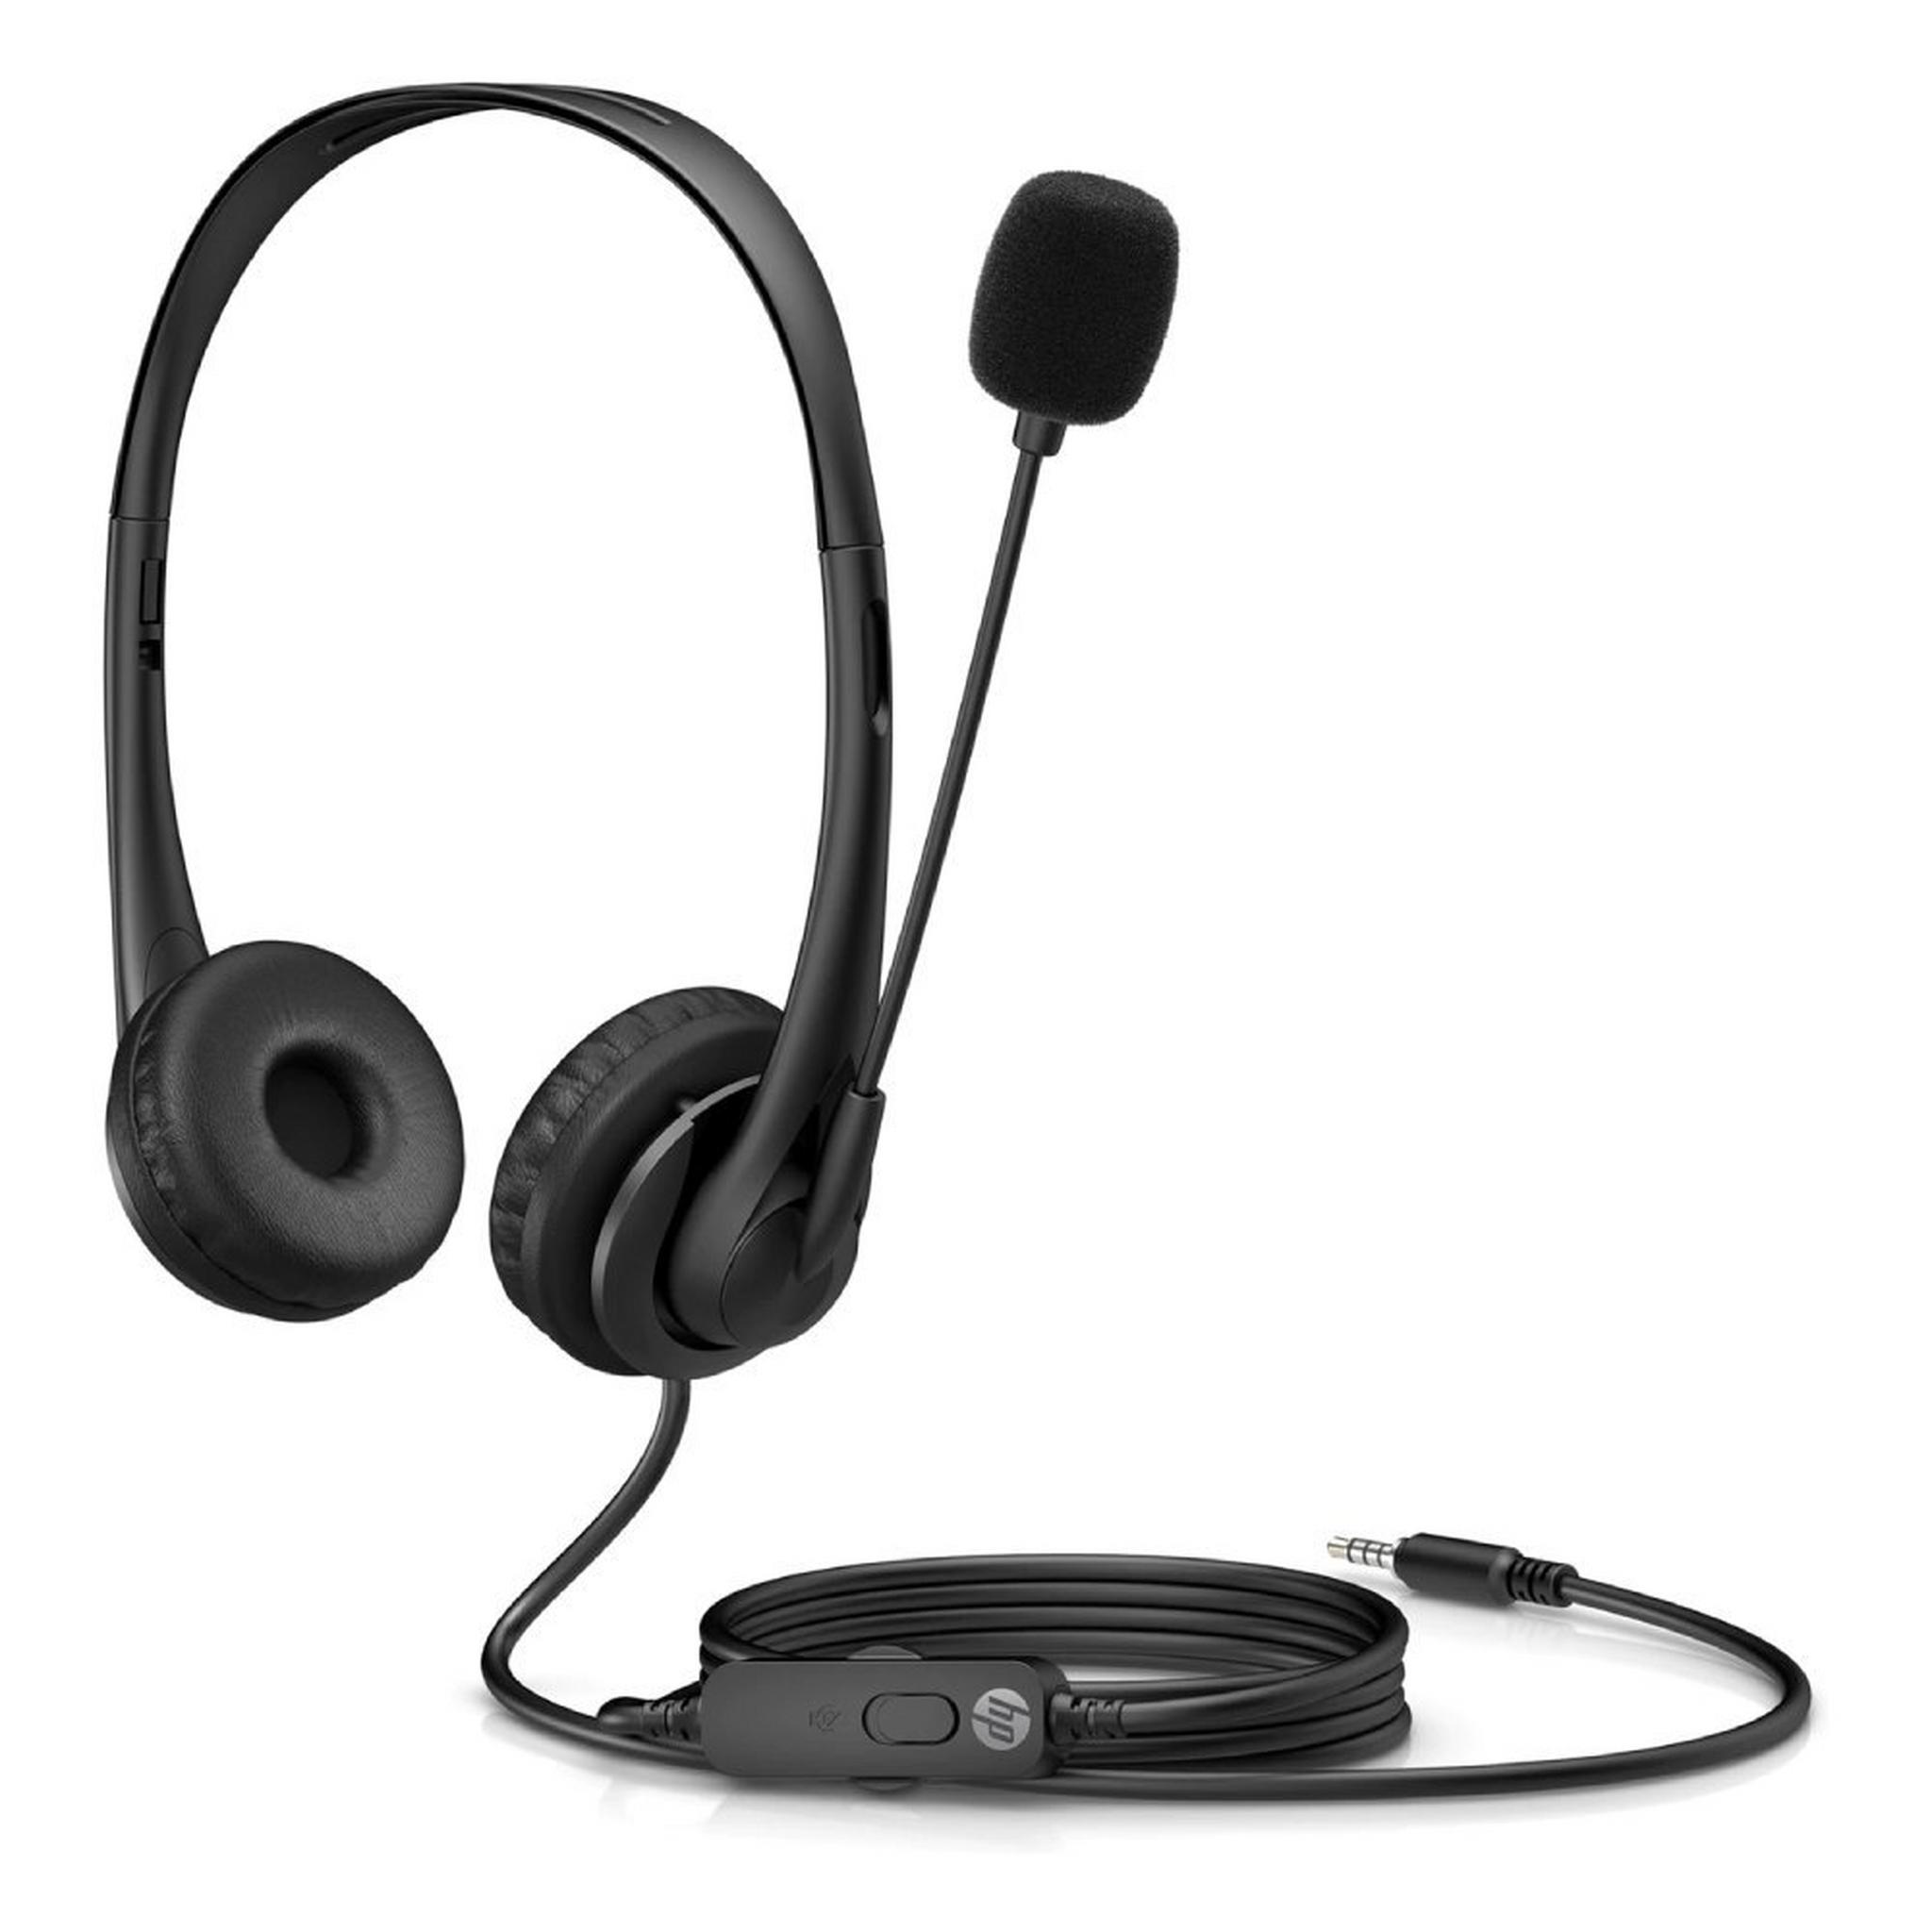 HP Wired 3.5mm Stereo Headset - Black (428H6AA#ABB)